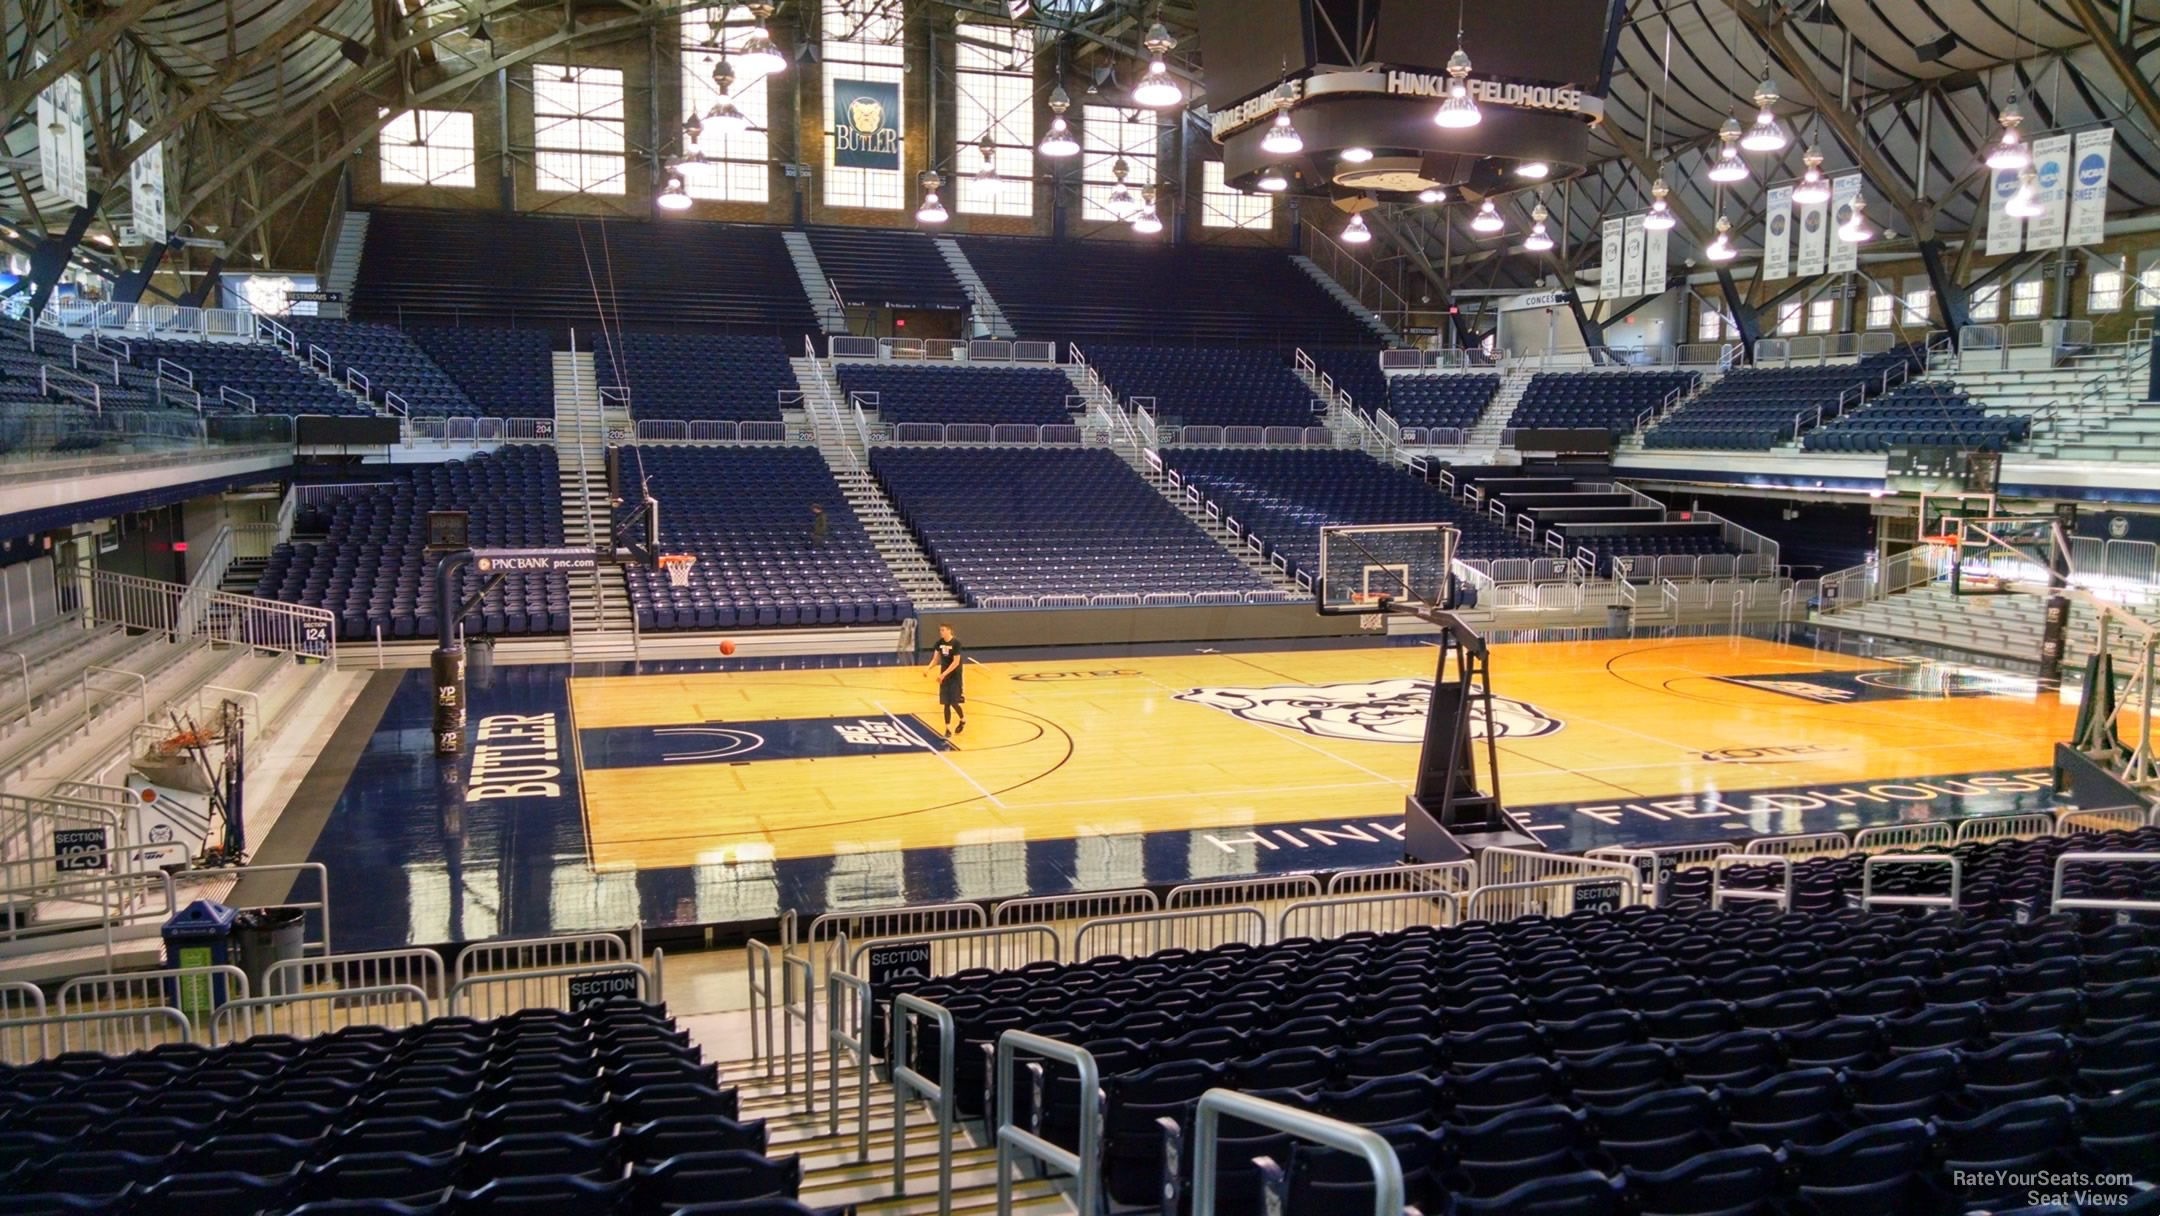 section 120, row 18 seat view  - hinkle fieldhouse